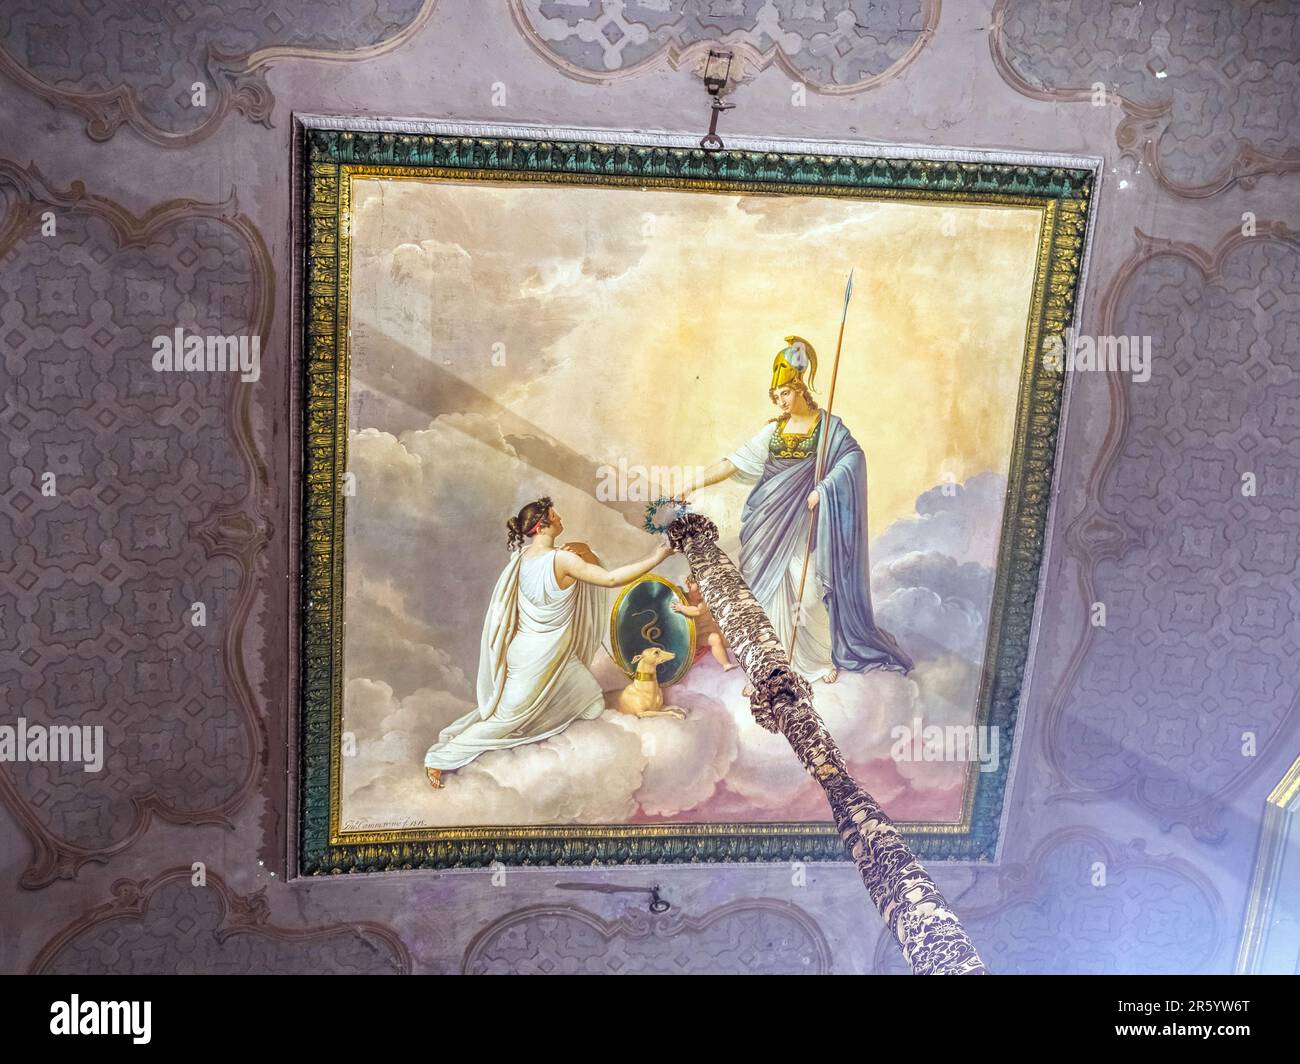 Painted ceiling depicting an allegory featuring Pallas Crowning Loyalty by Giuseppe Cammarano (Sciacca 1766 - Naples 1850)  in the third Antechamber of the Royal Palace of Naples that In 1734 became the royal residence of the Bourbons - Naples, Italy Stock Photo